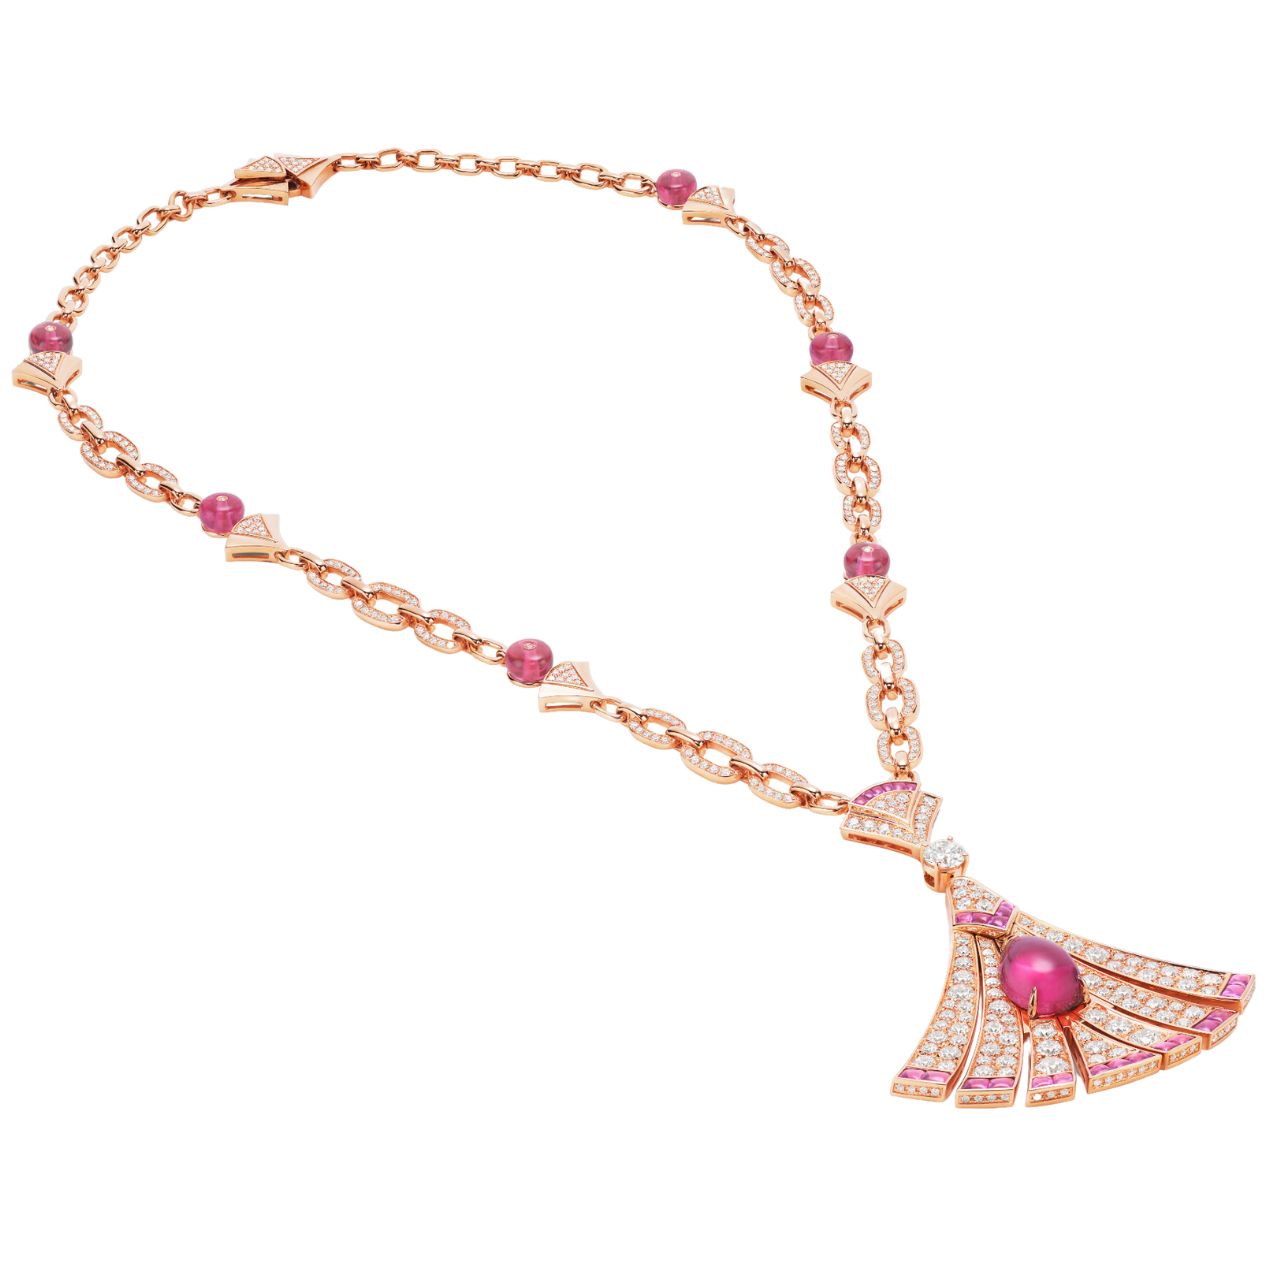 Divas’ Dream necklace in 18k rose gold set with rubellites, 4.57 carats of diamonds, and mother-of-pearl element.